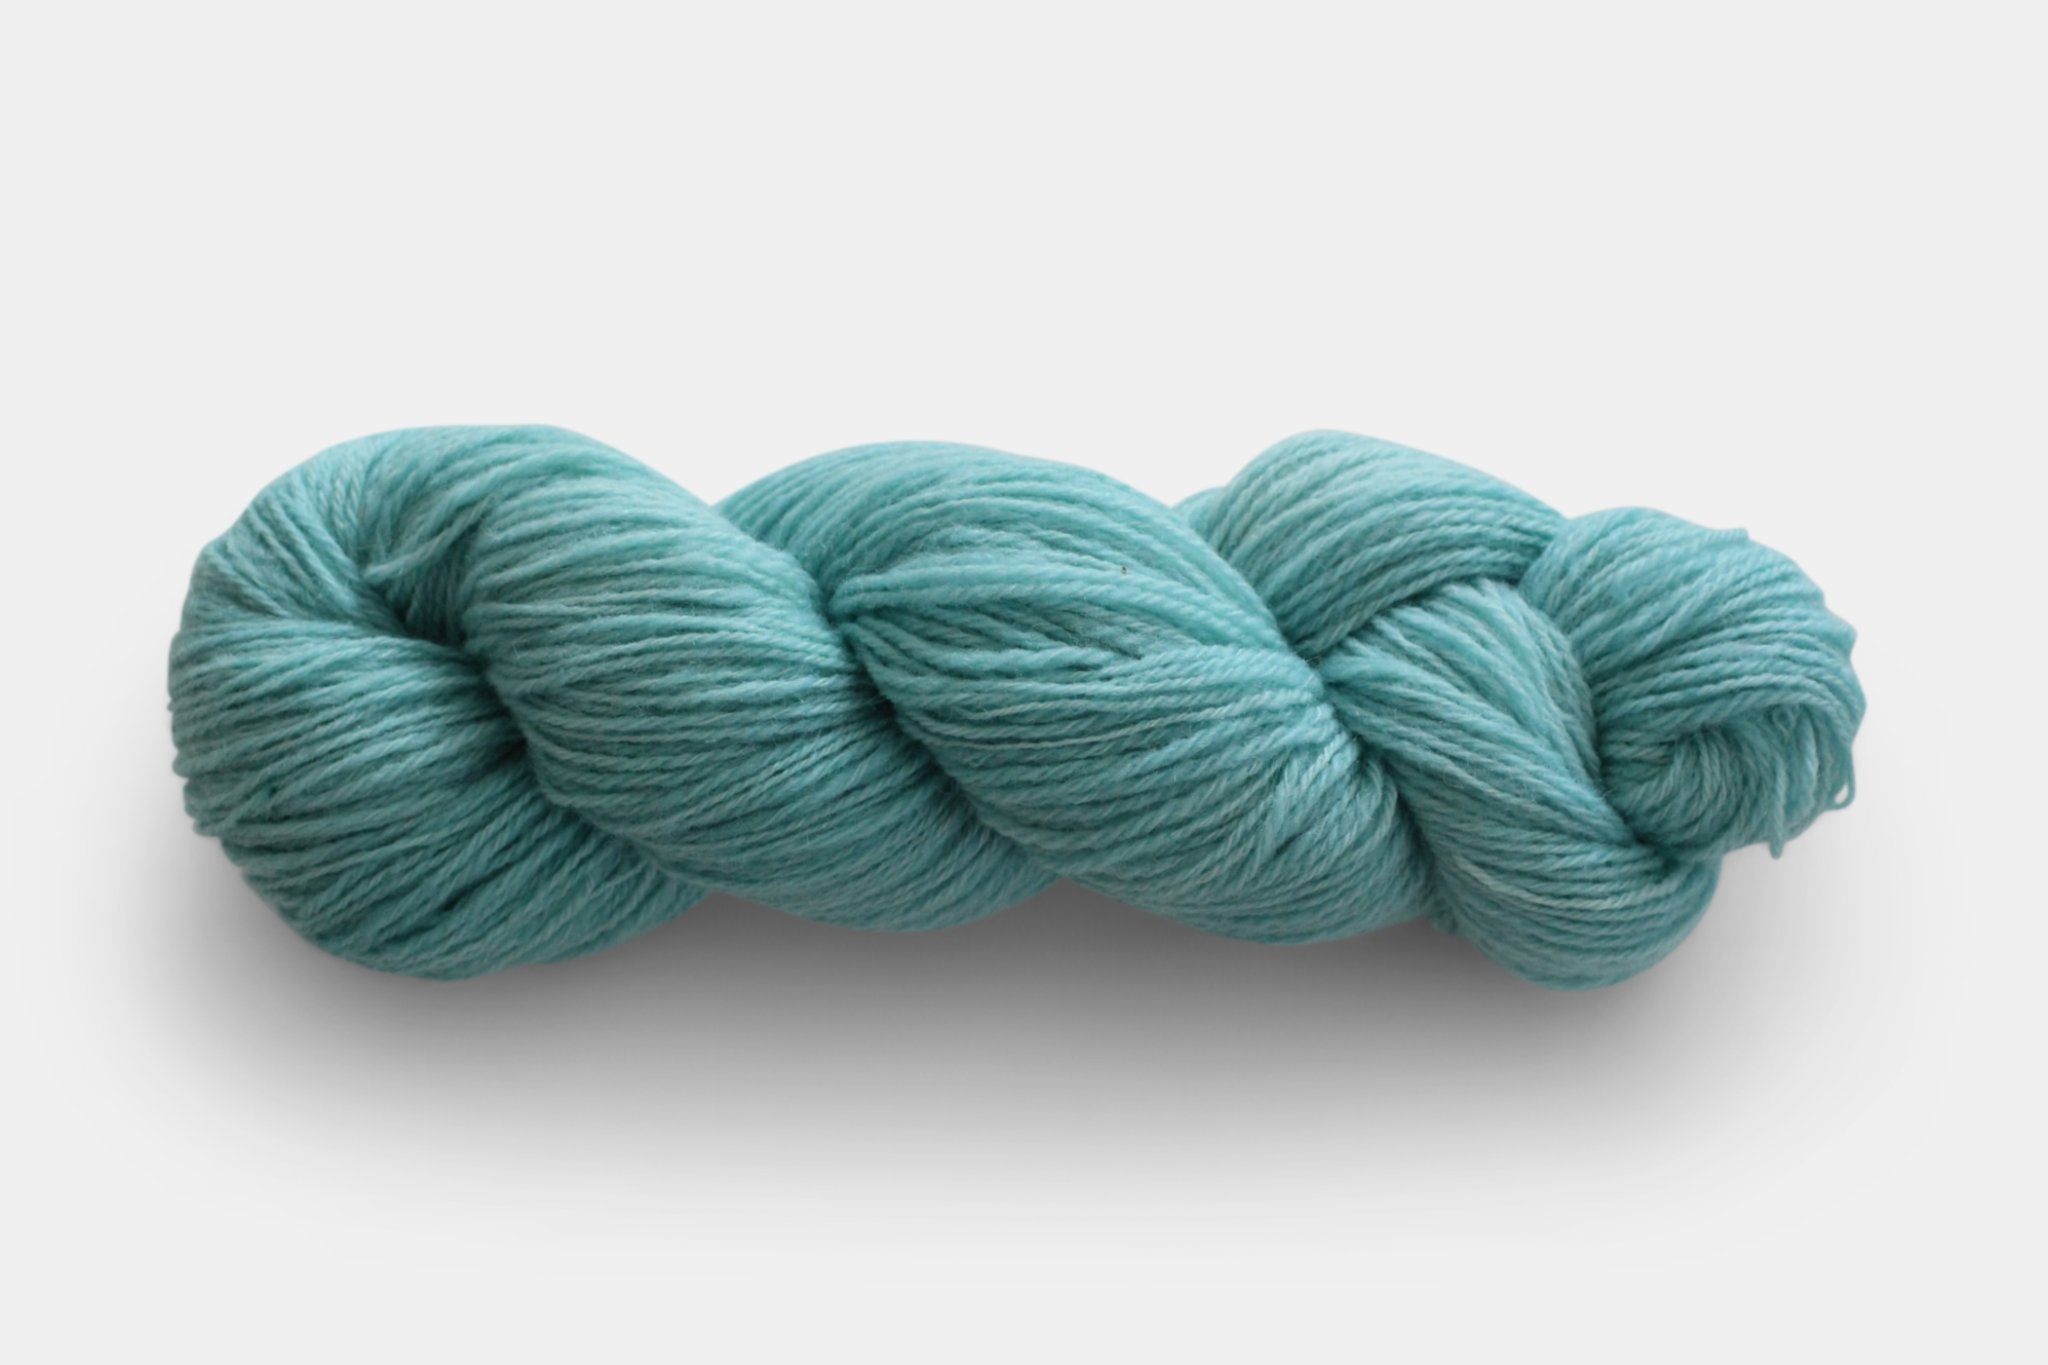 Fleece and Harmony Point Prim Sock in Cotton Candy